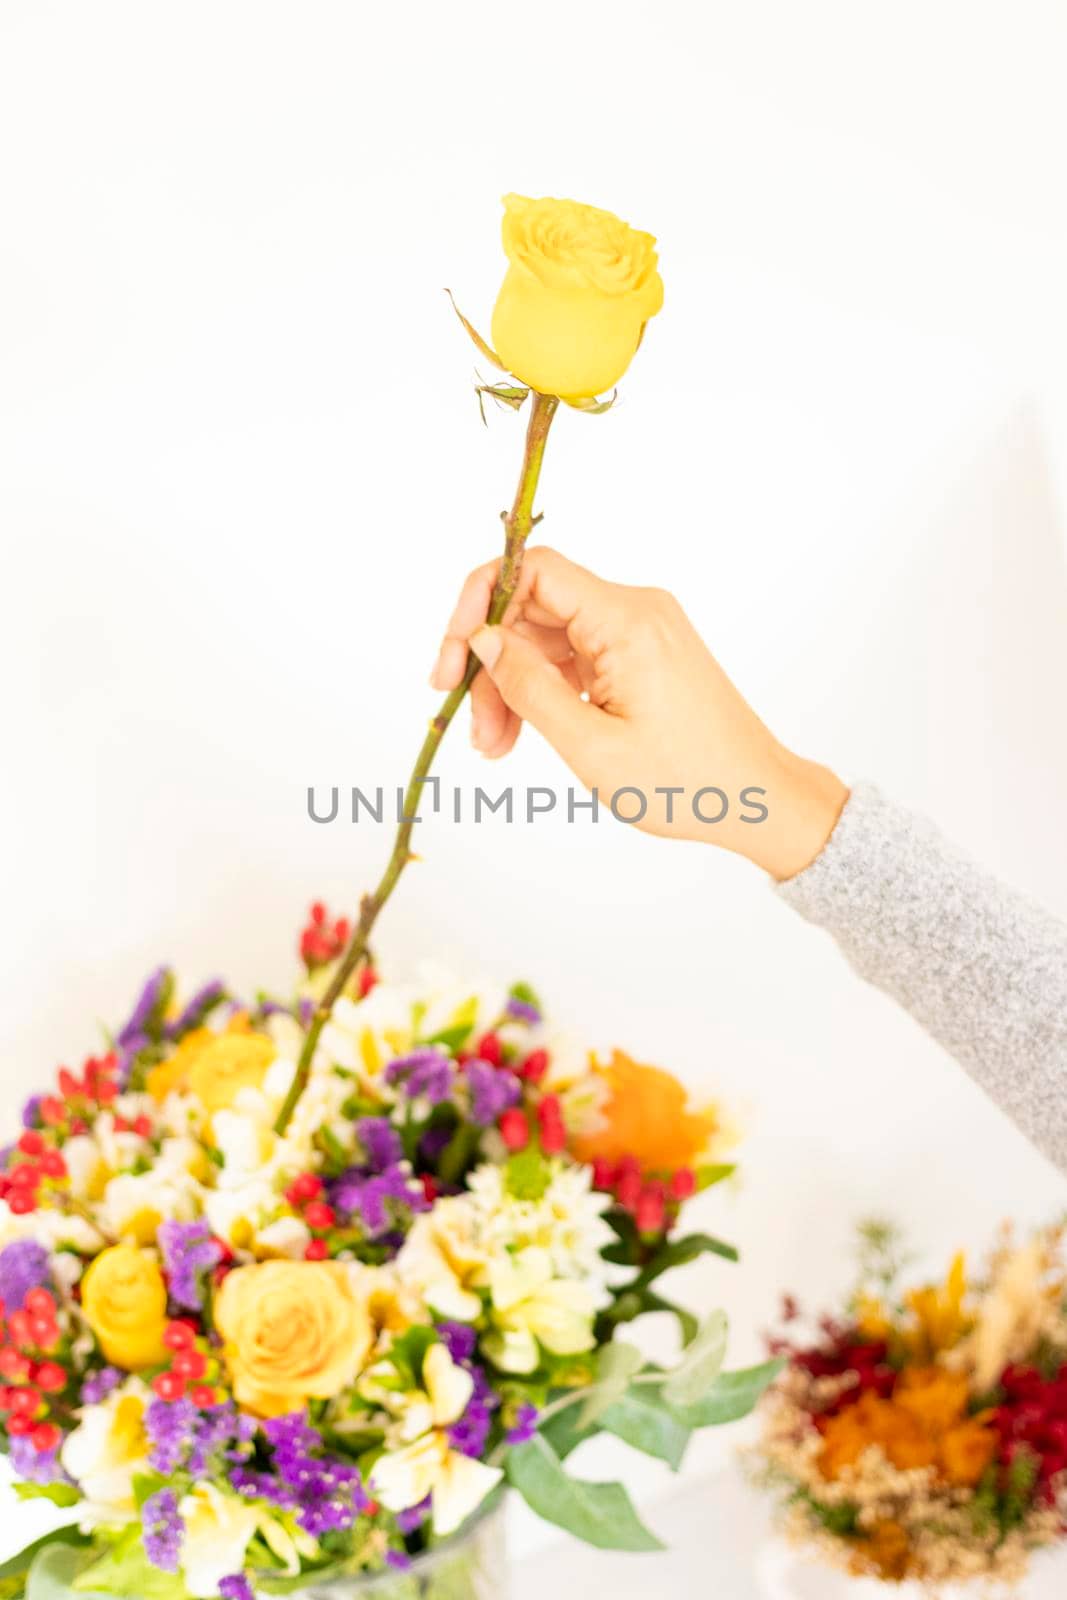 Woman's hand placing yellow rose to flower bouquet by eagg13